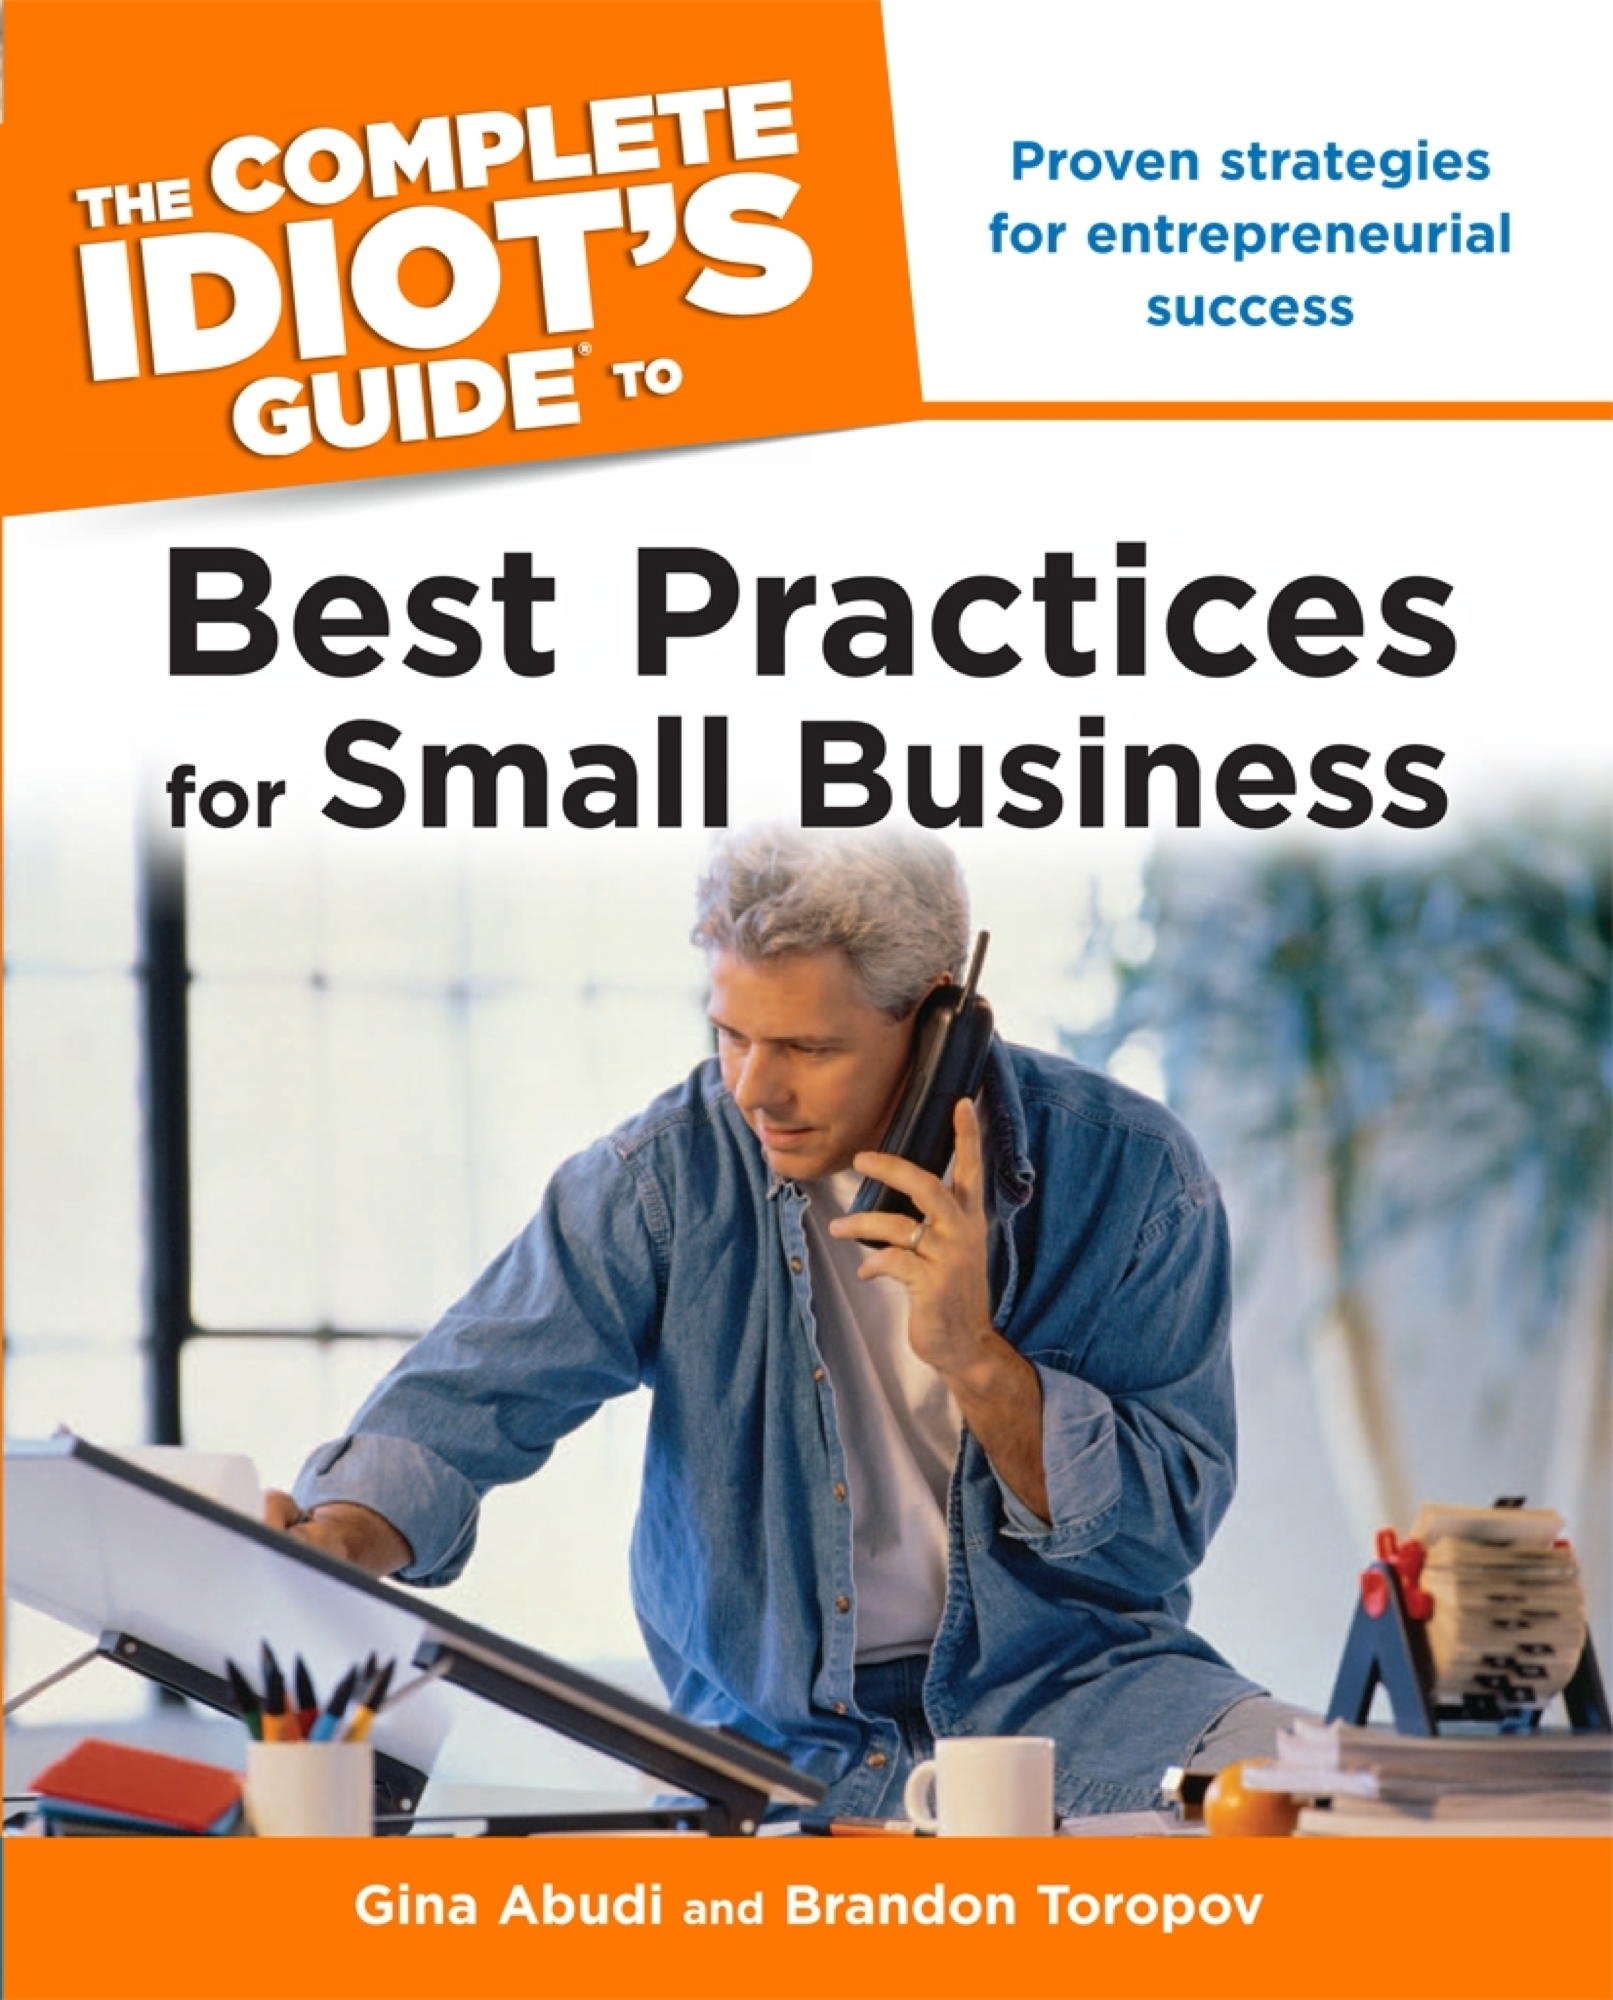 The Complete Idiot's Guide to Best Practices for Small Business